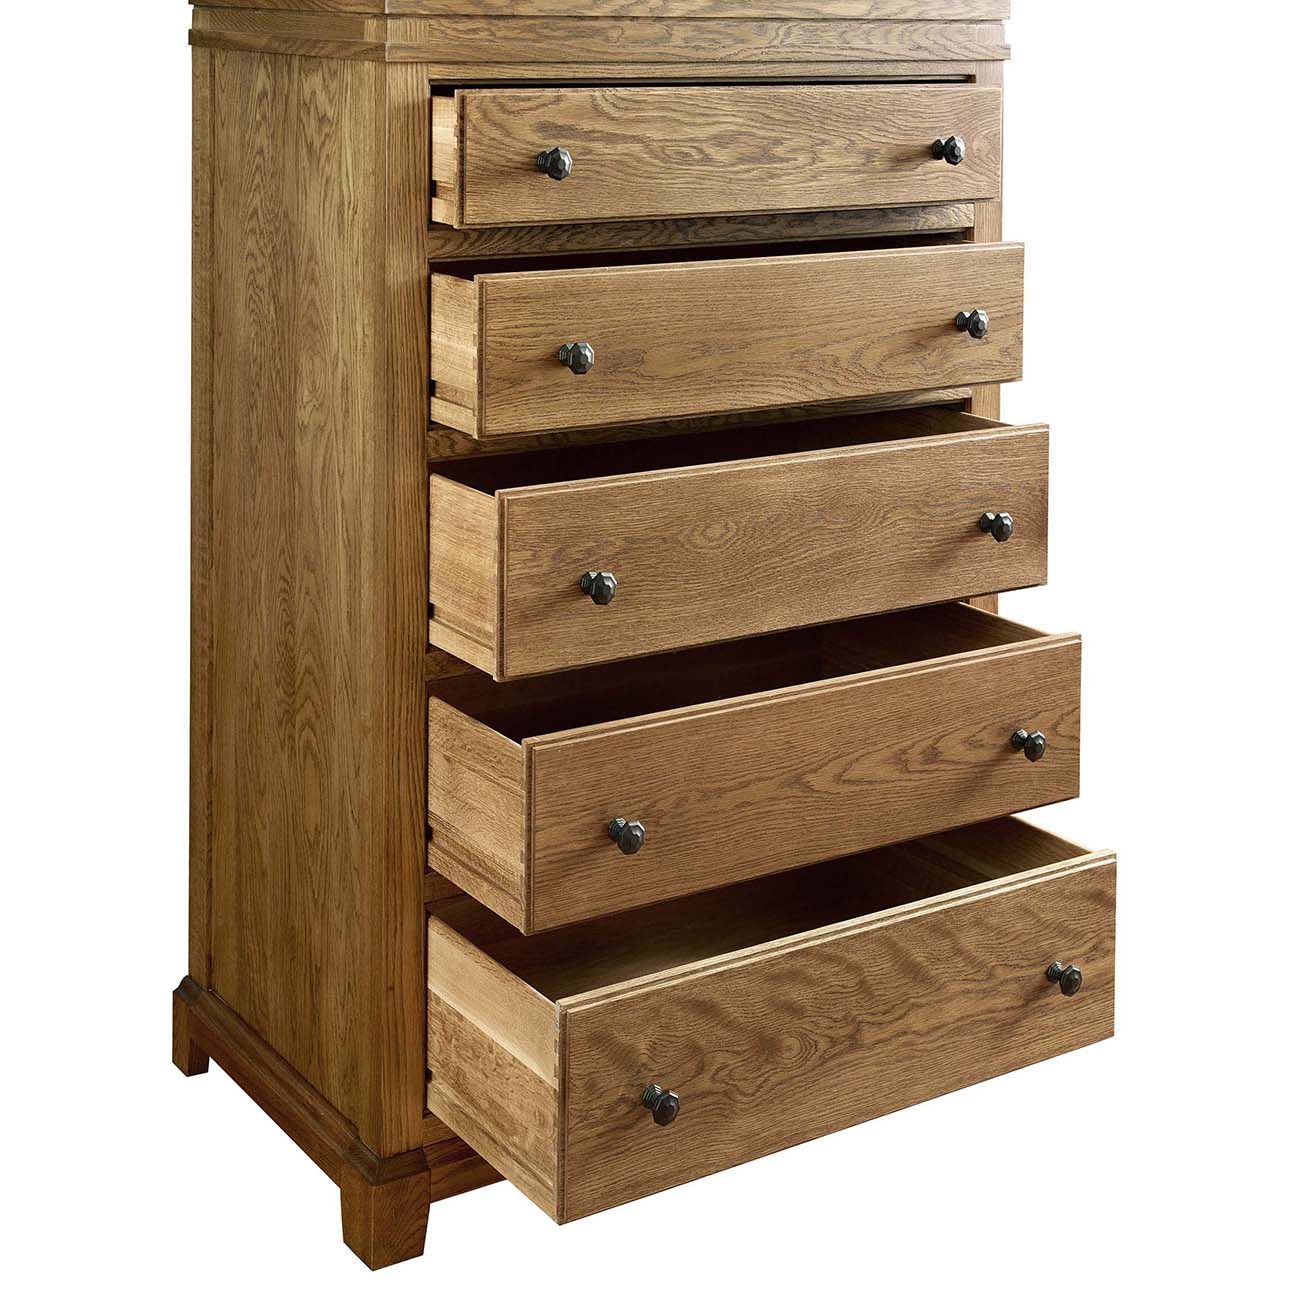 St. Lawrence Tall Chest - Stickley Brand